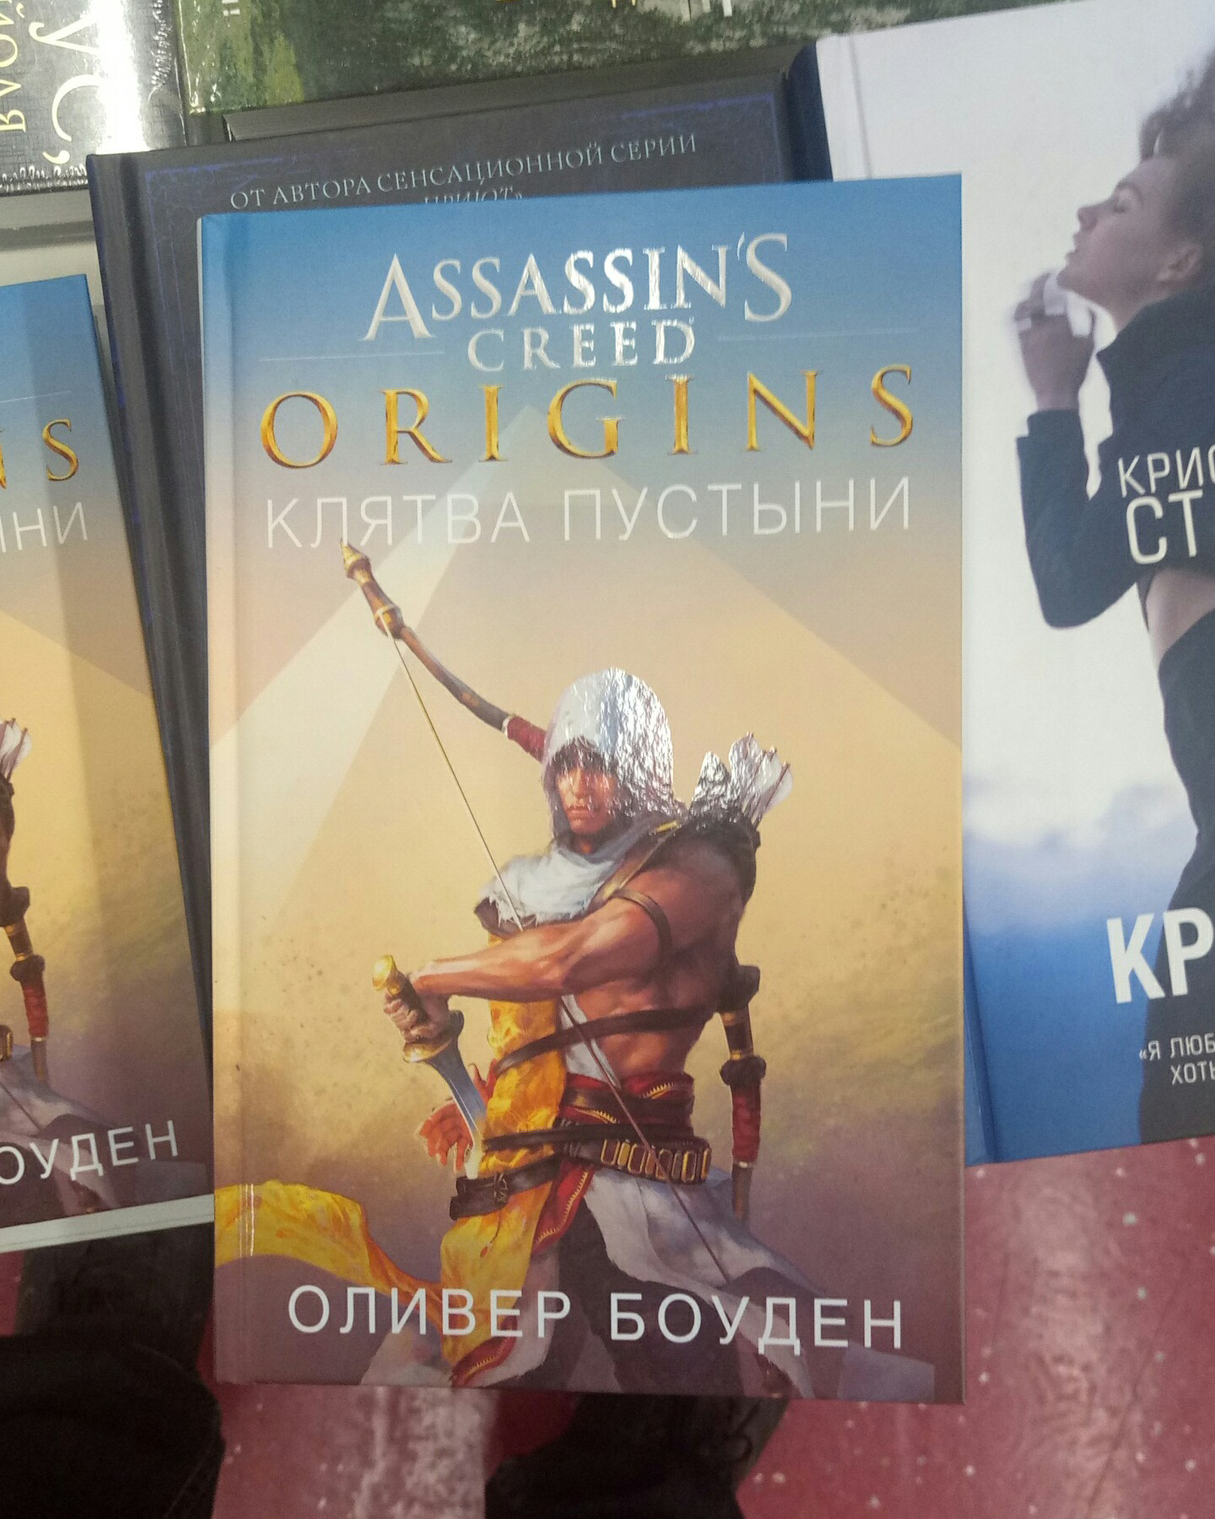 I saw Anchorite's book here in the store... - My, Books, Games, Assassins creed, Ubisoft, Anchorite, Longpost, Fotozhaba, Fake, Photoshop master